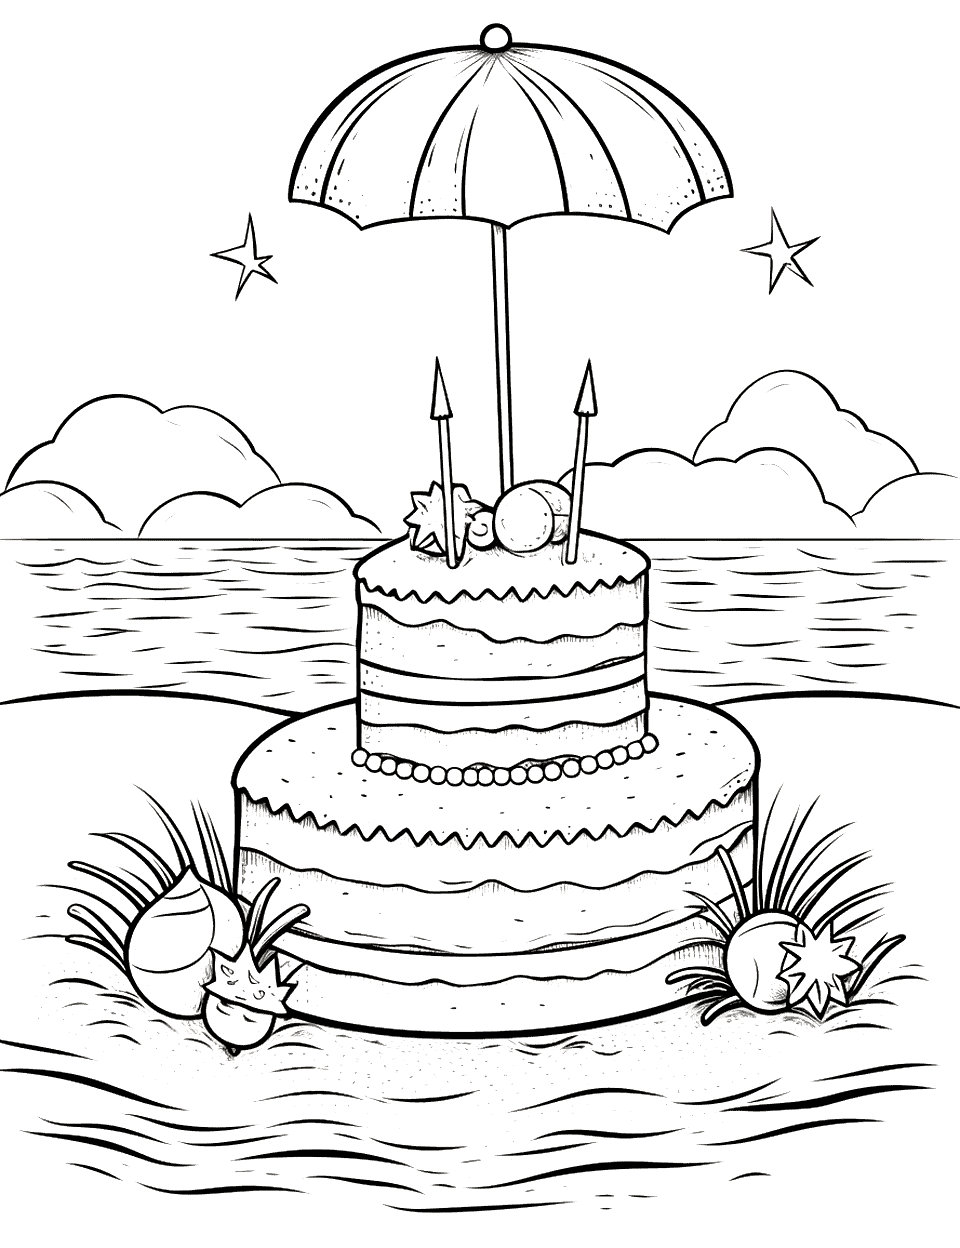 Beach Day Bliss Cake Coloring Page - A beach-themed cake with umbrellas and other beach-themed decorations.